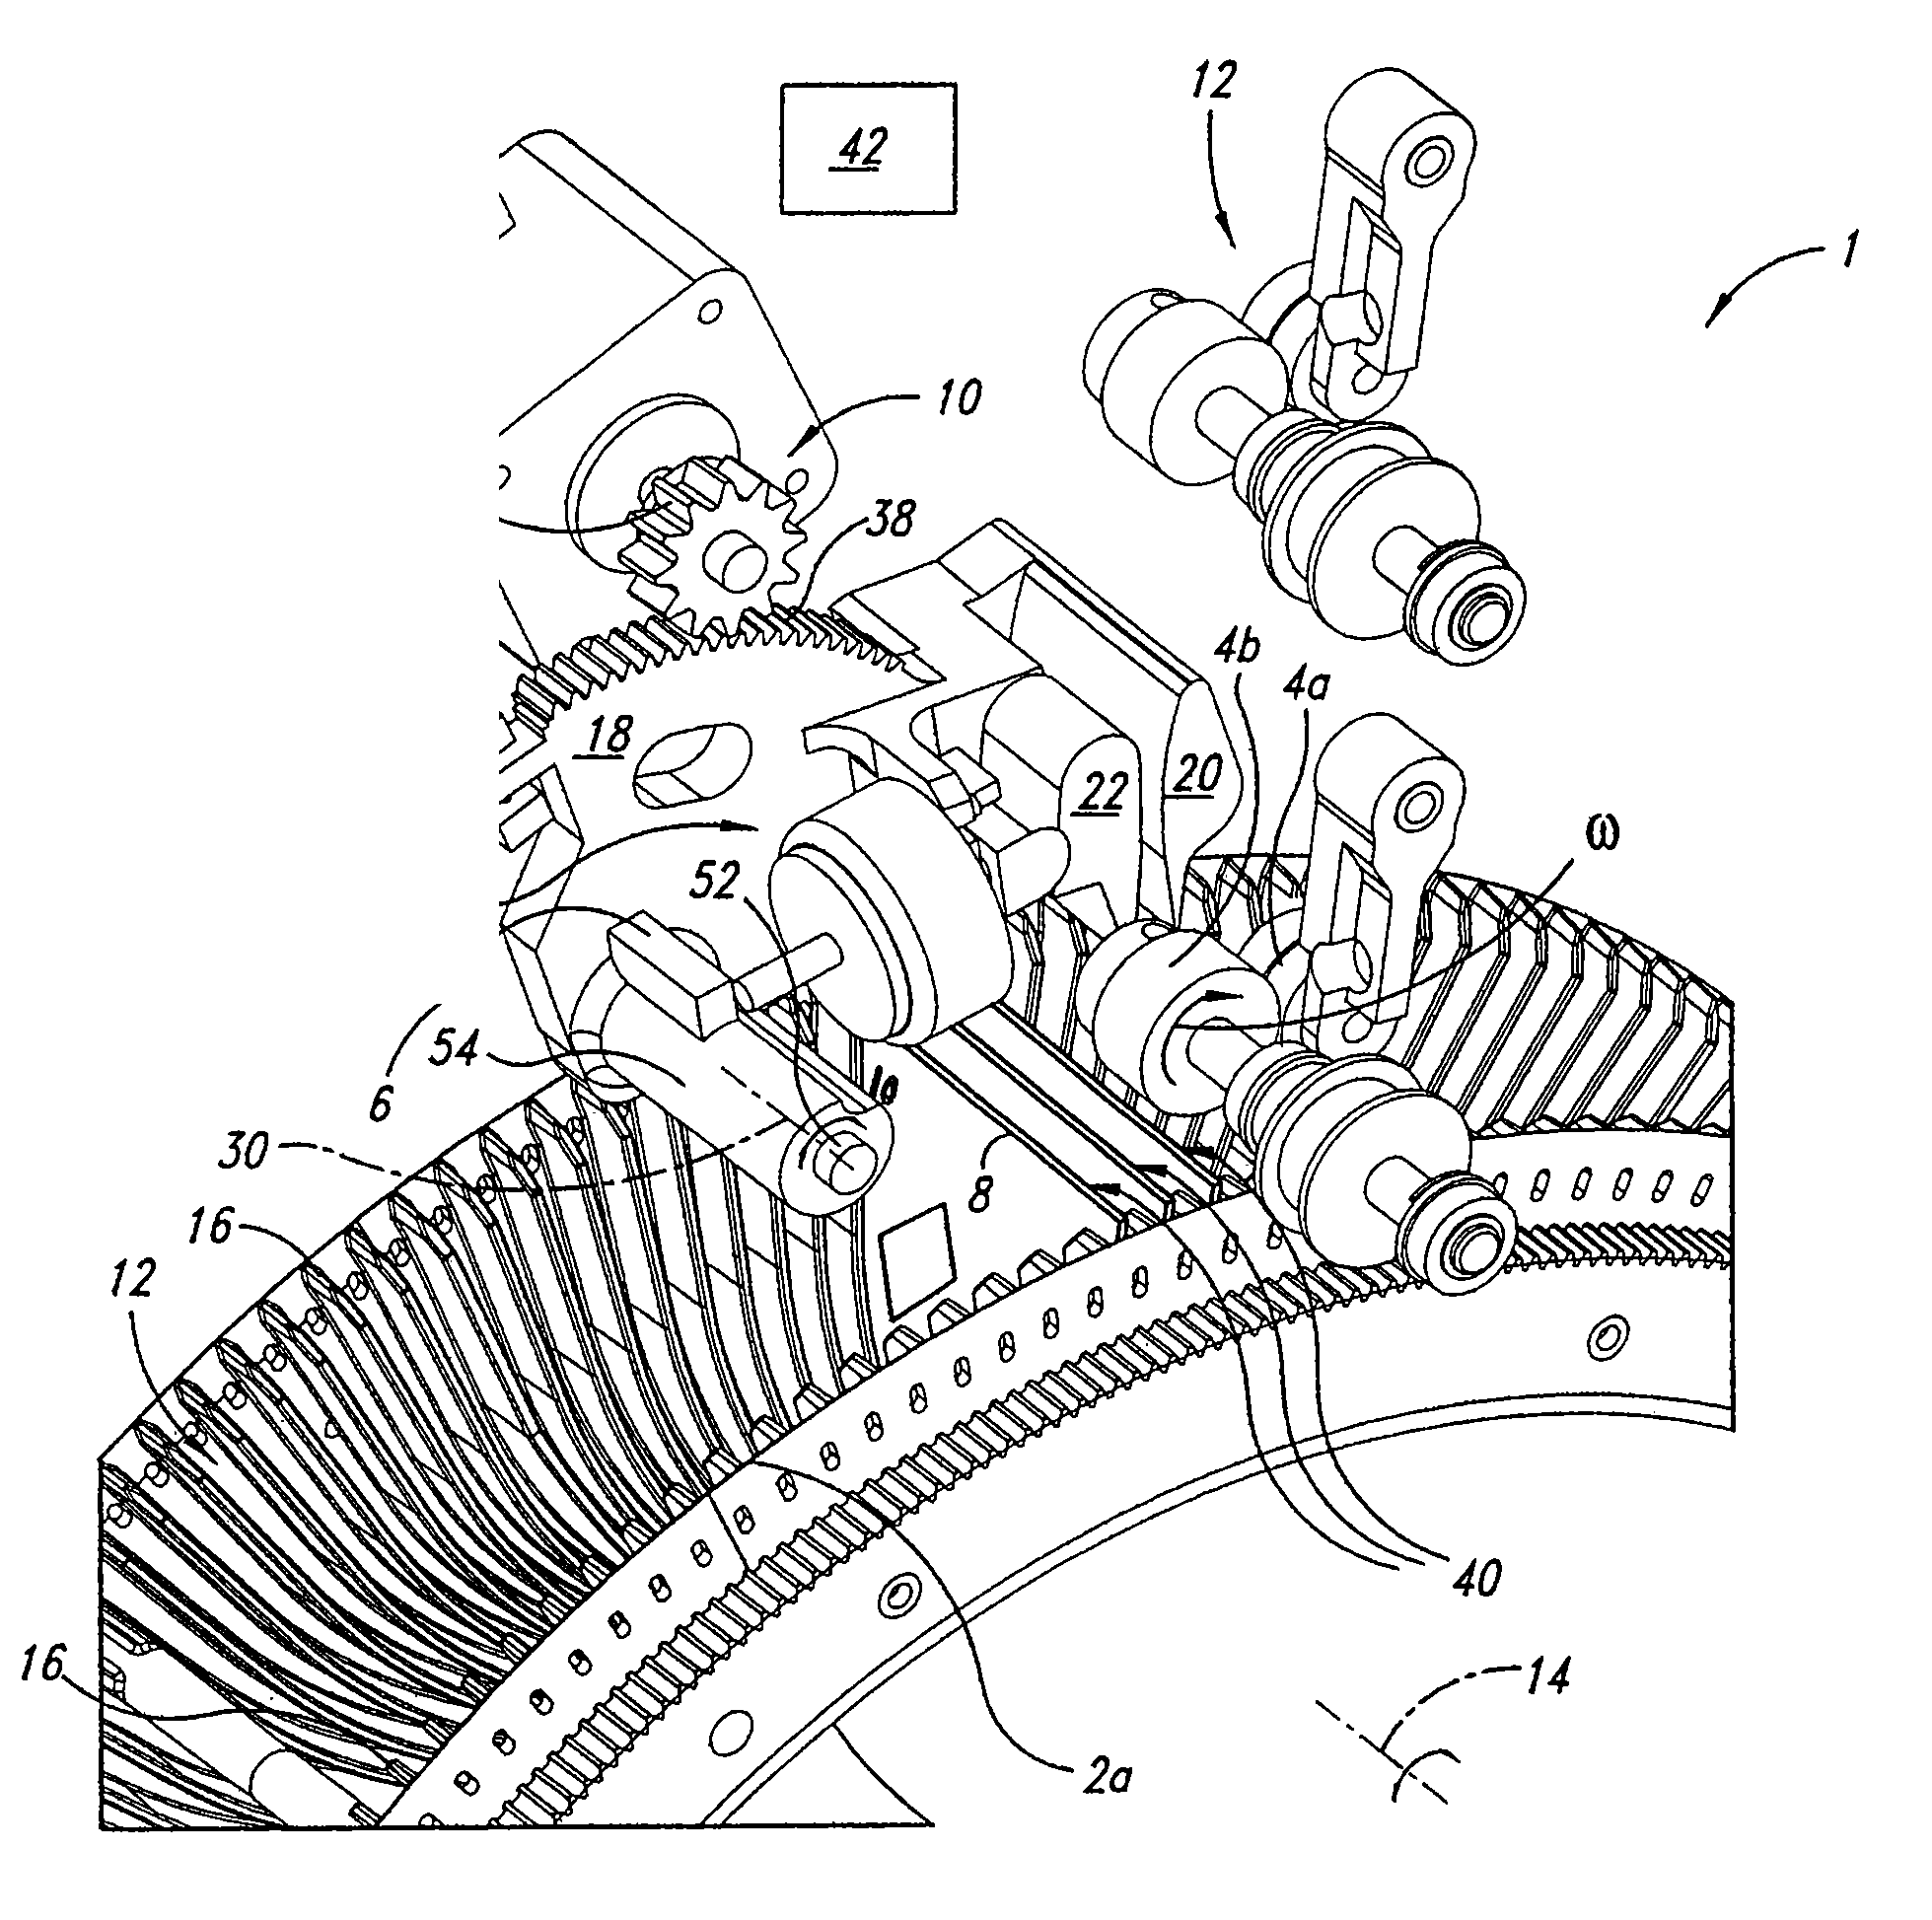 Device for use in playing card handling system